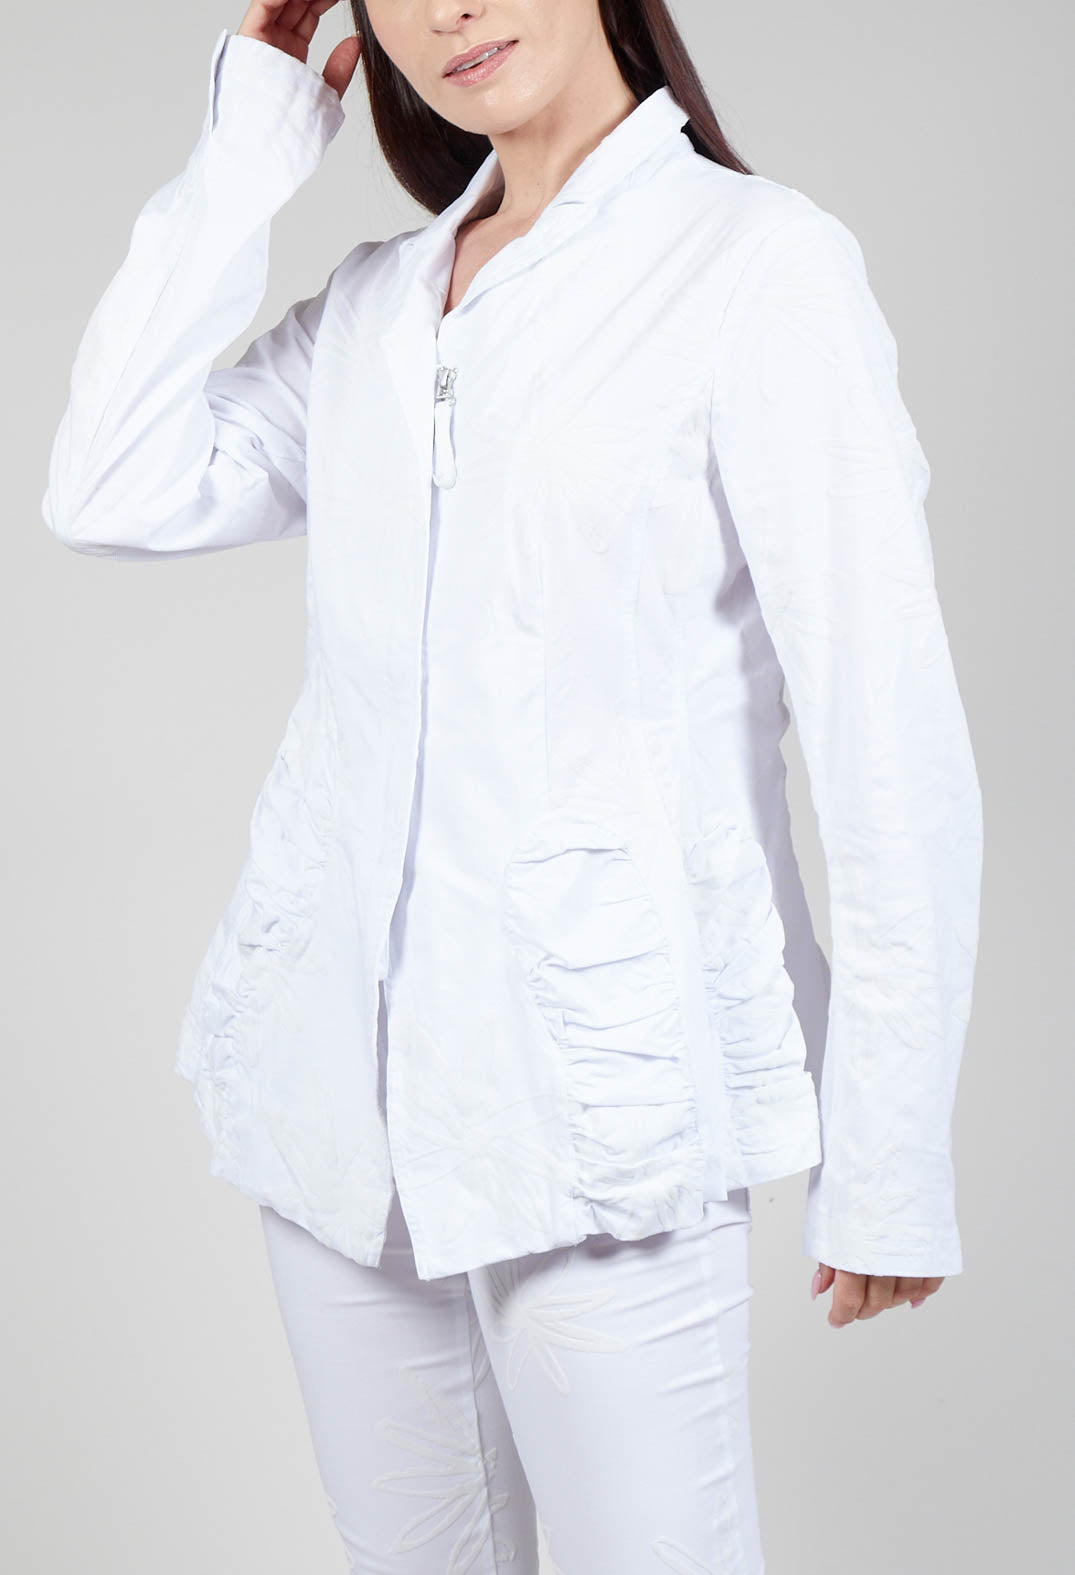 Flower Print Ruched Jacket in White Flock Print